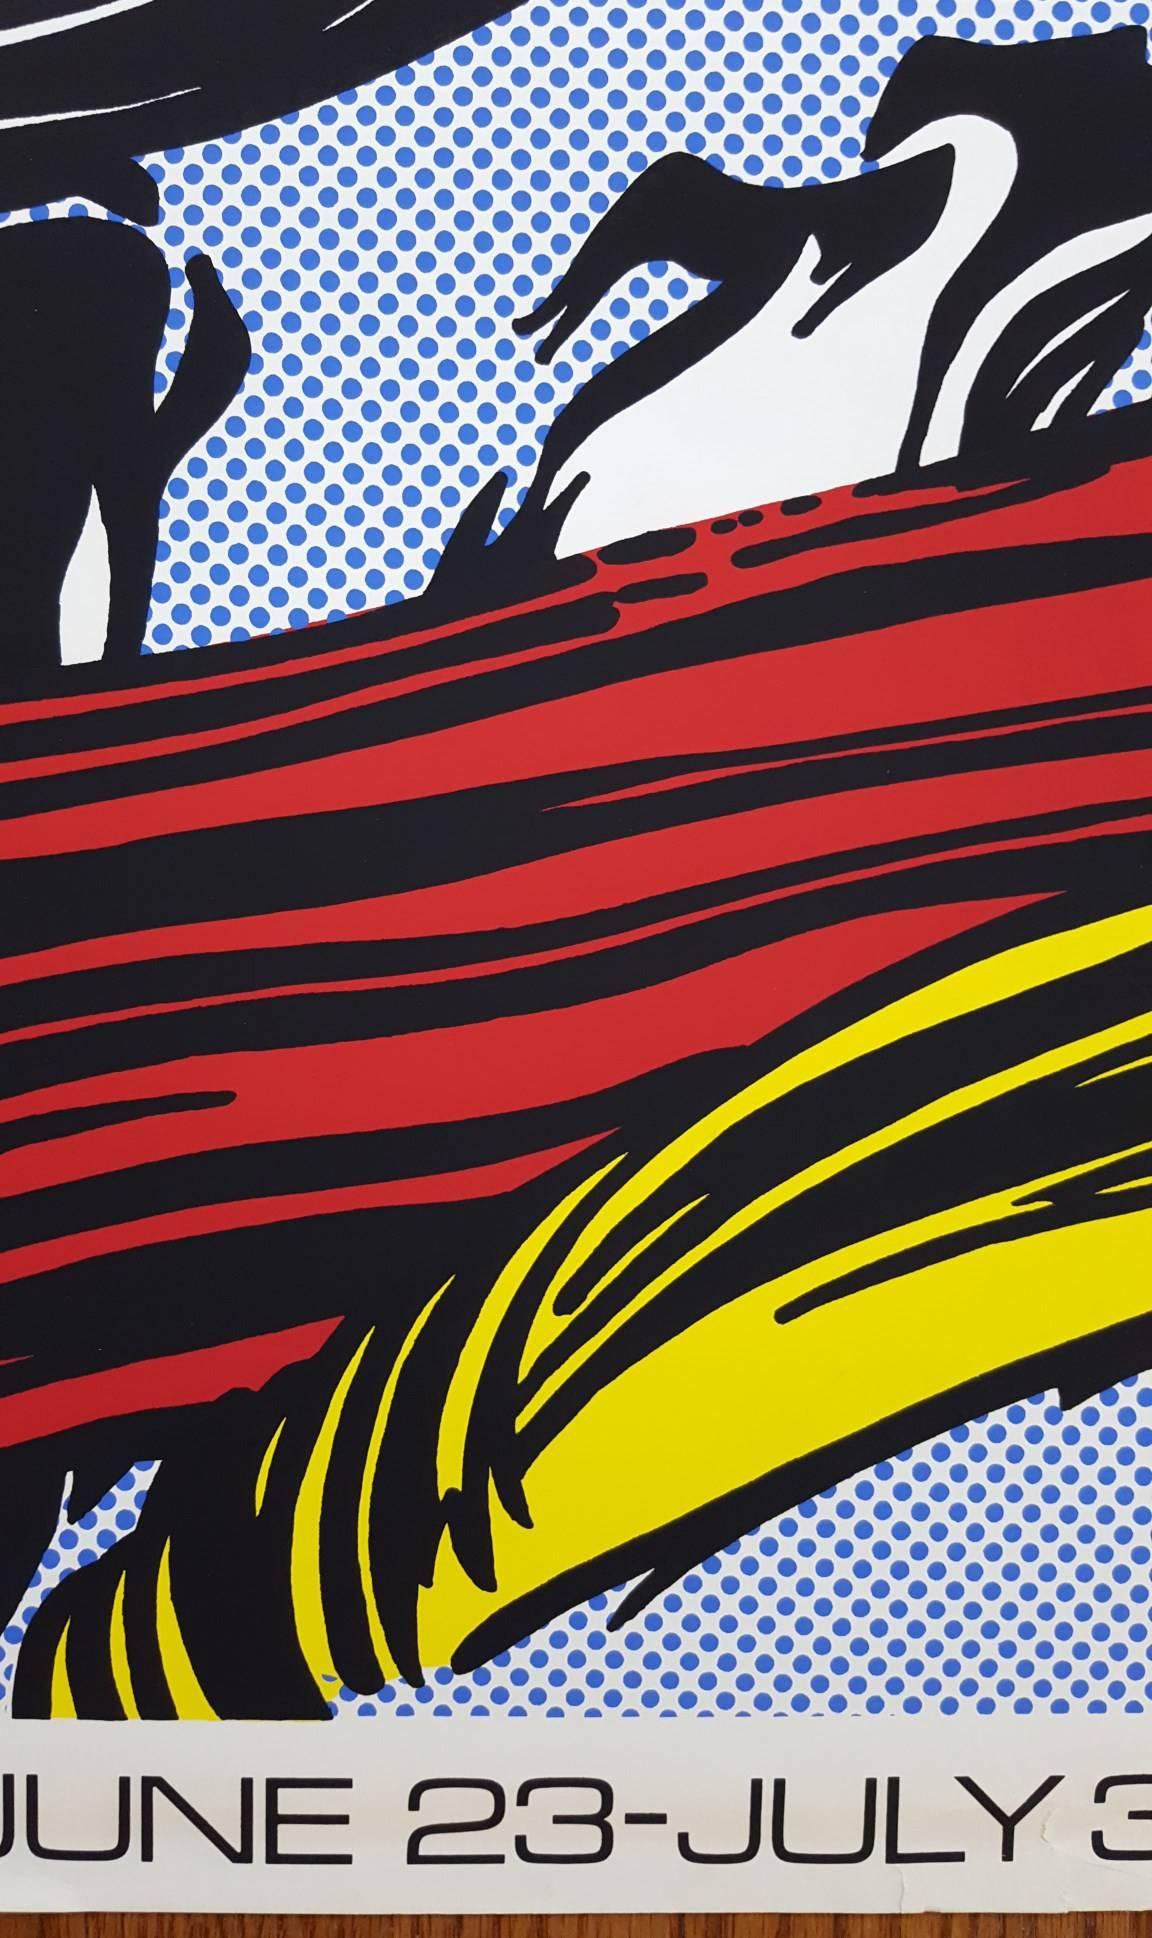 An original screenprint exhibition poster by American artist Roy Lichtenstein (1923-1997) titled "Brushstrokes at Pasadena Art Museum", 1967. Limited edition: 1,000. Poster for the exhibition organized by John Coplans in the Pasadena Art